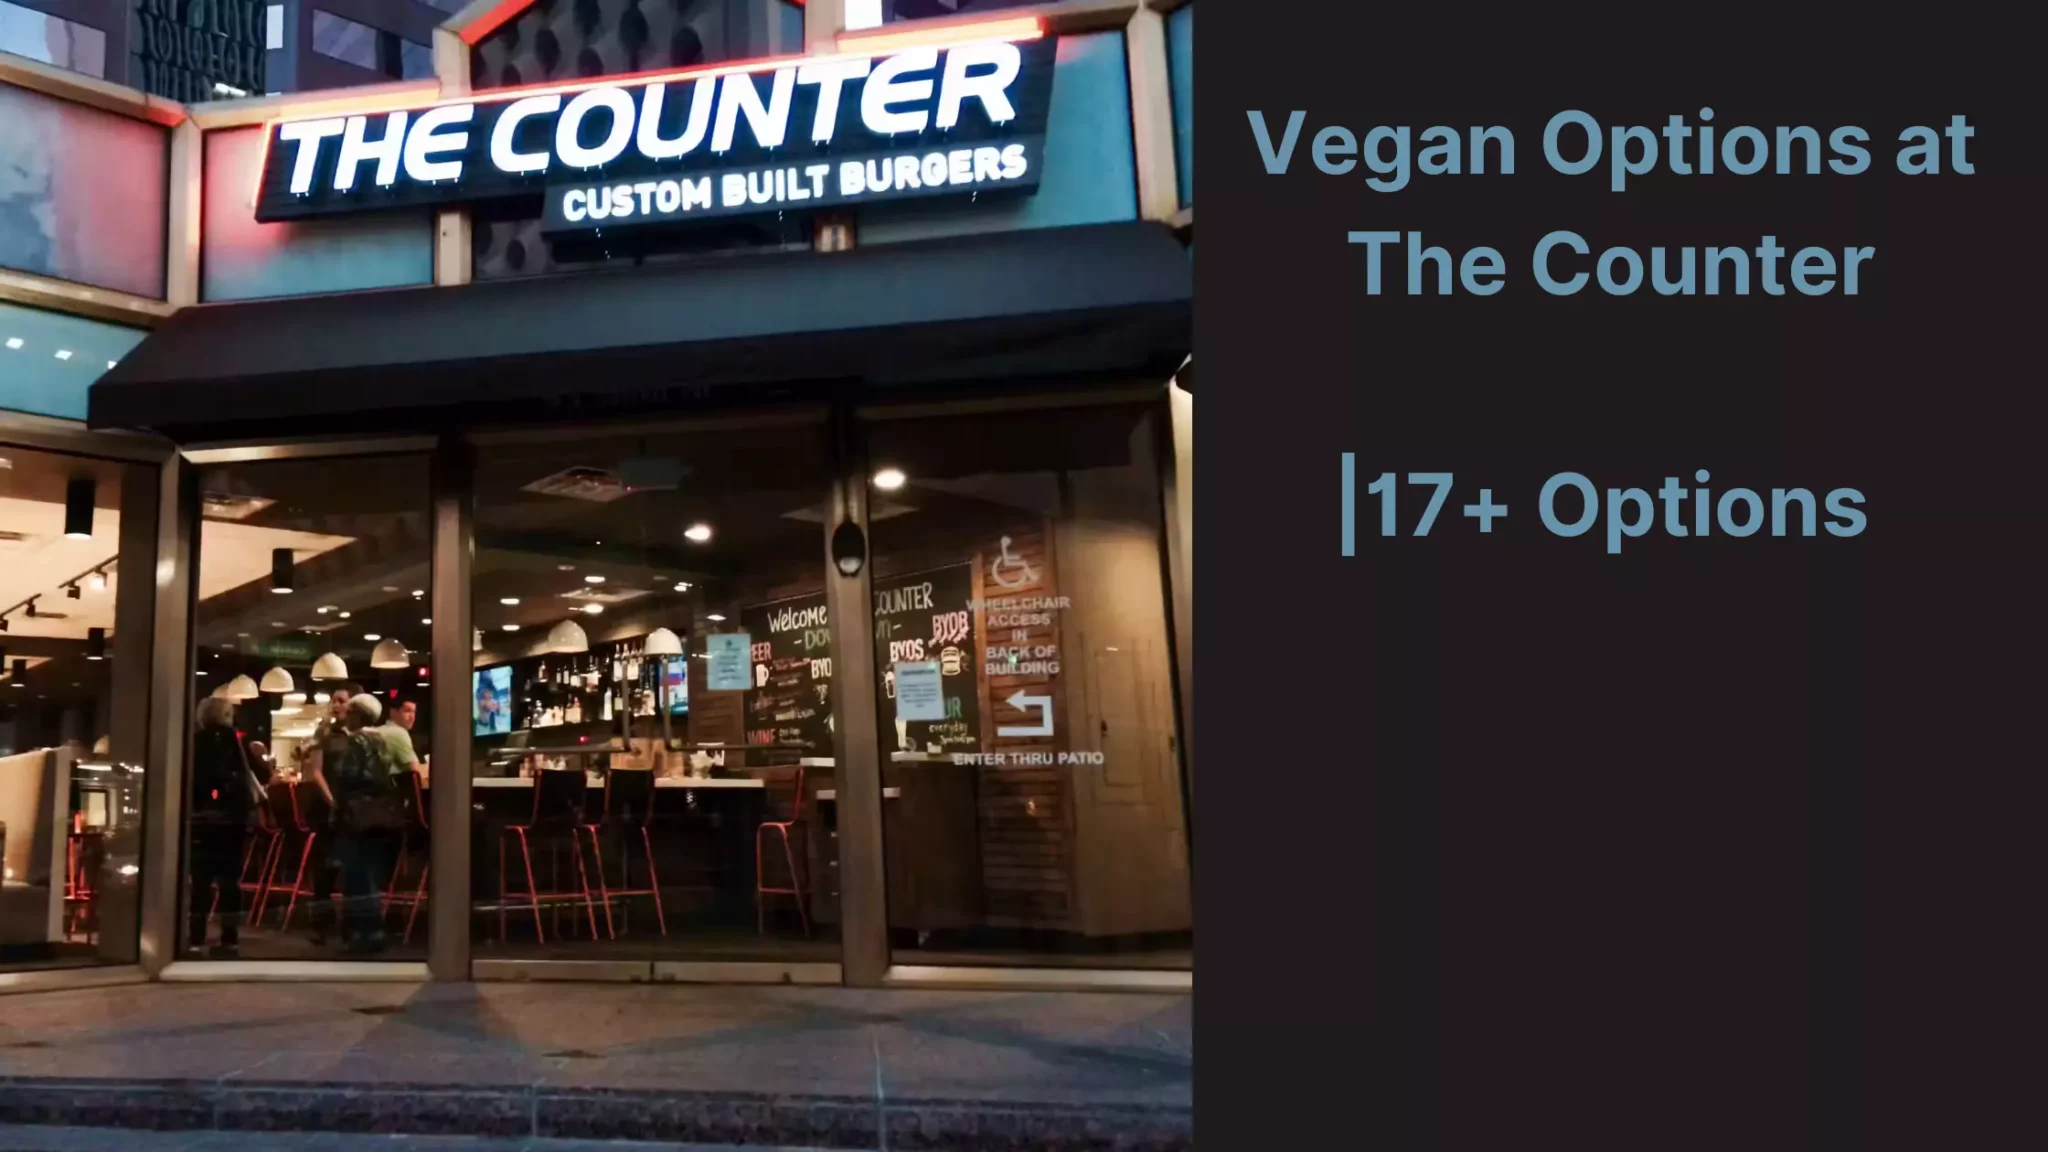 Vegan Options at The Counter